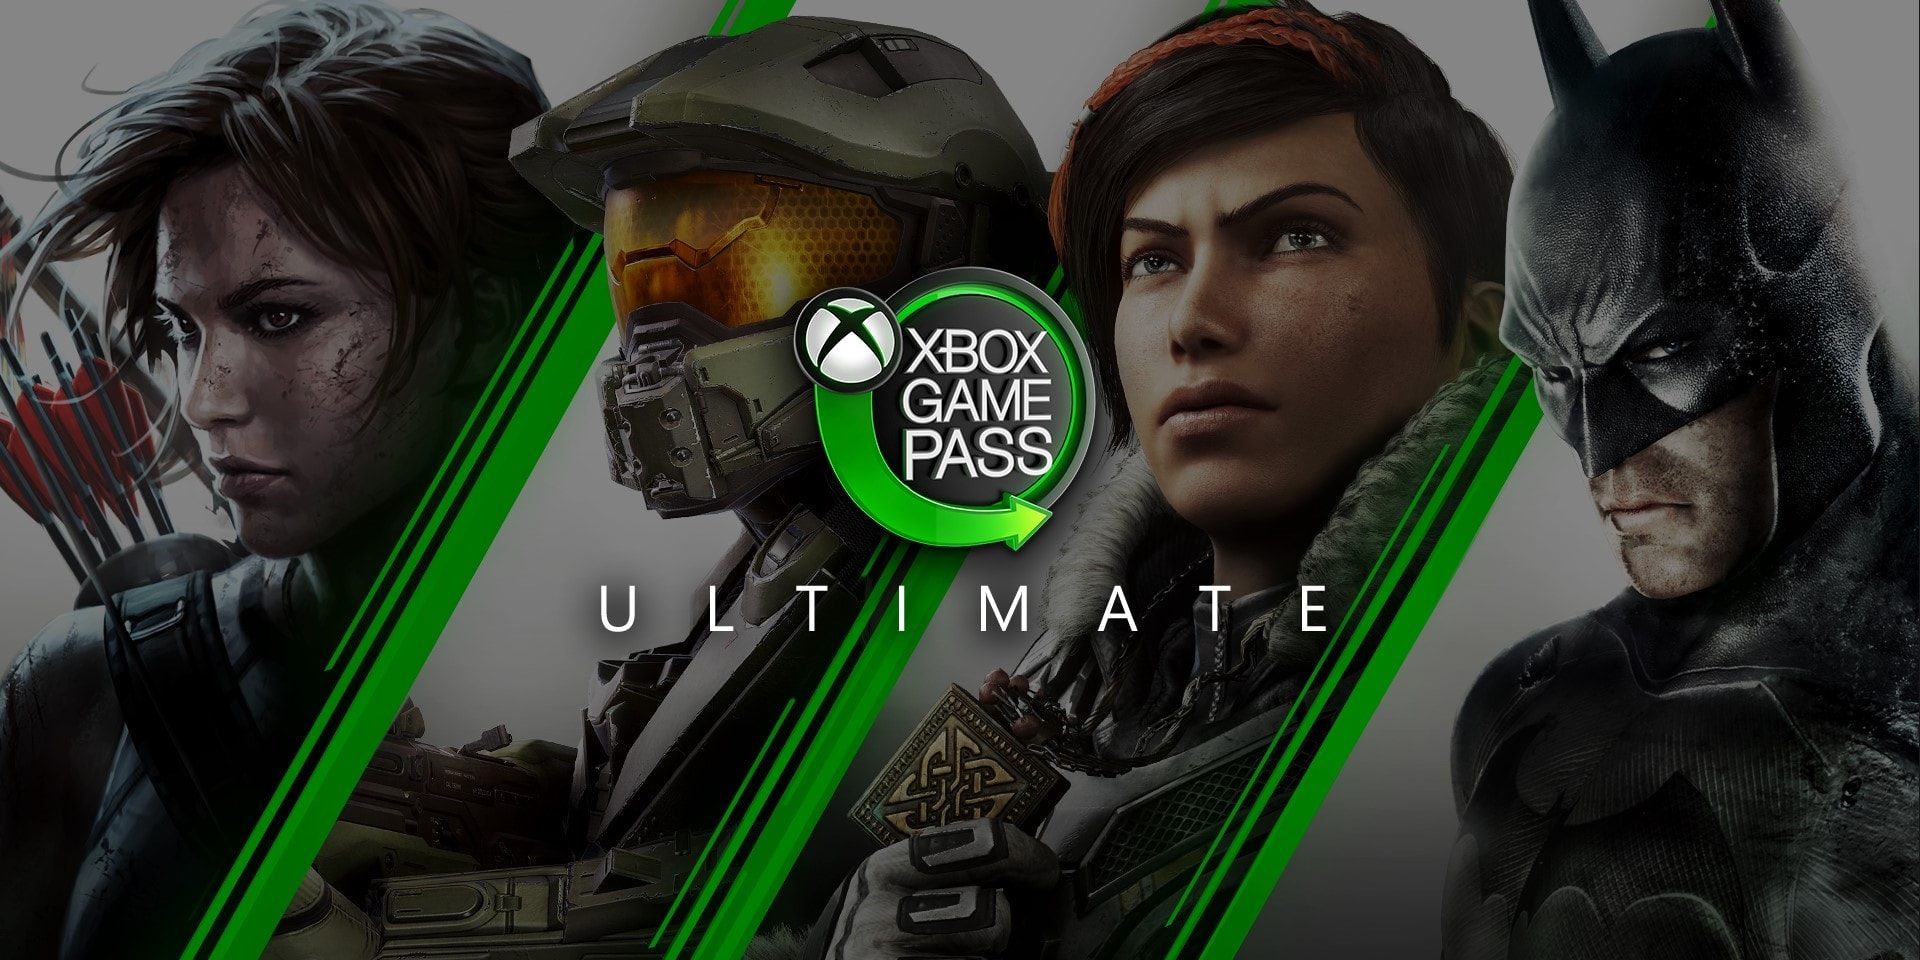 xbox game pass for macbook